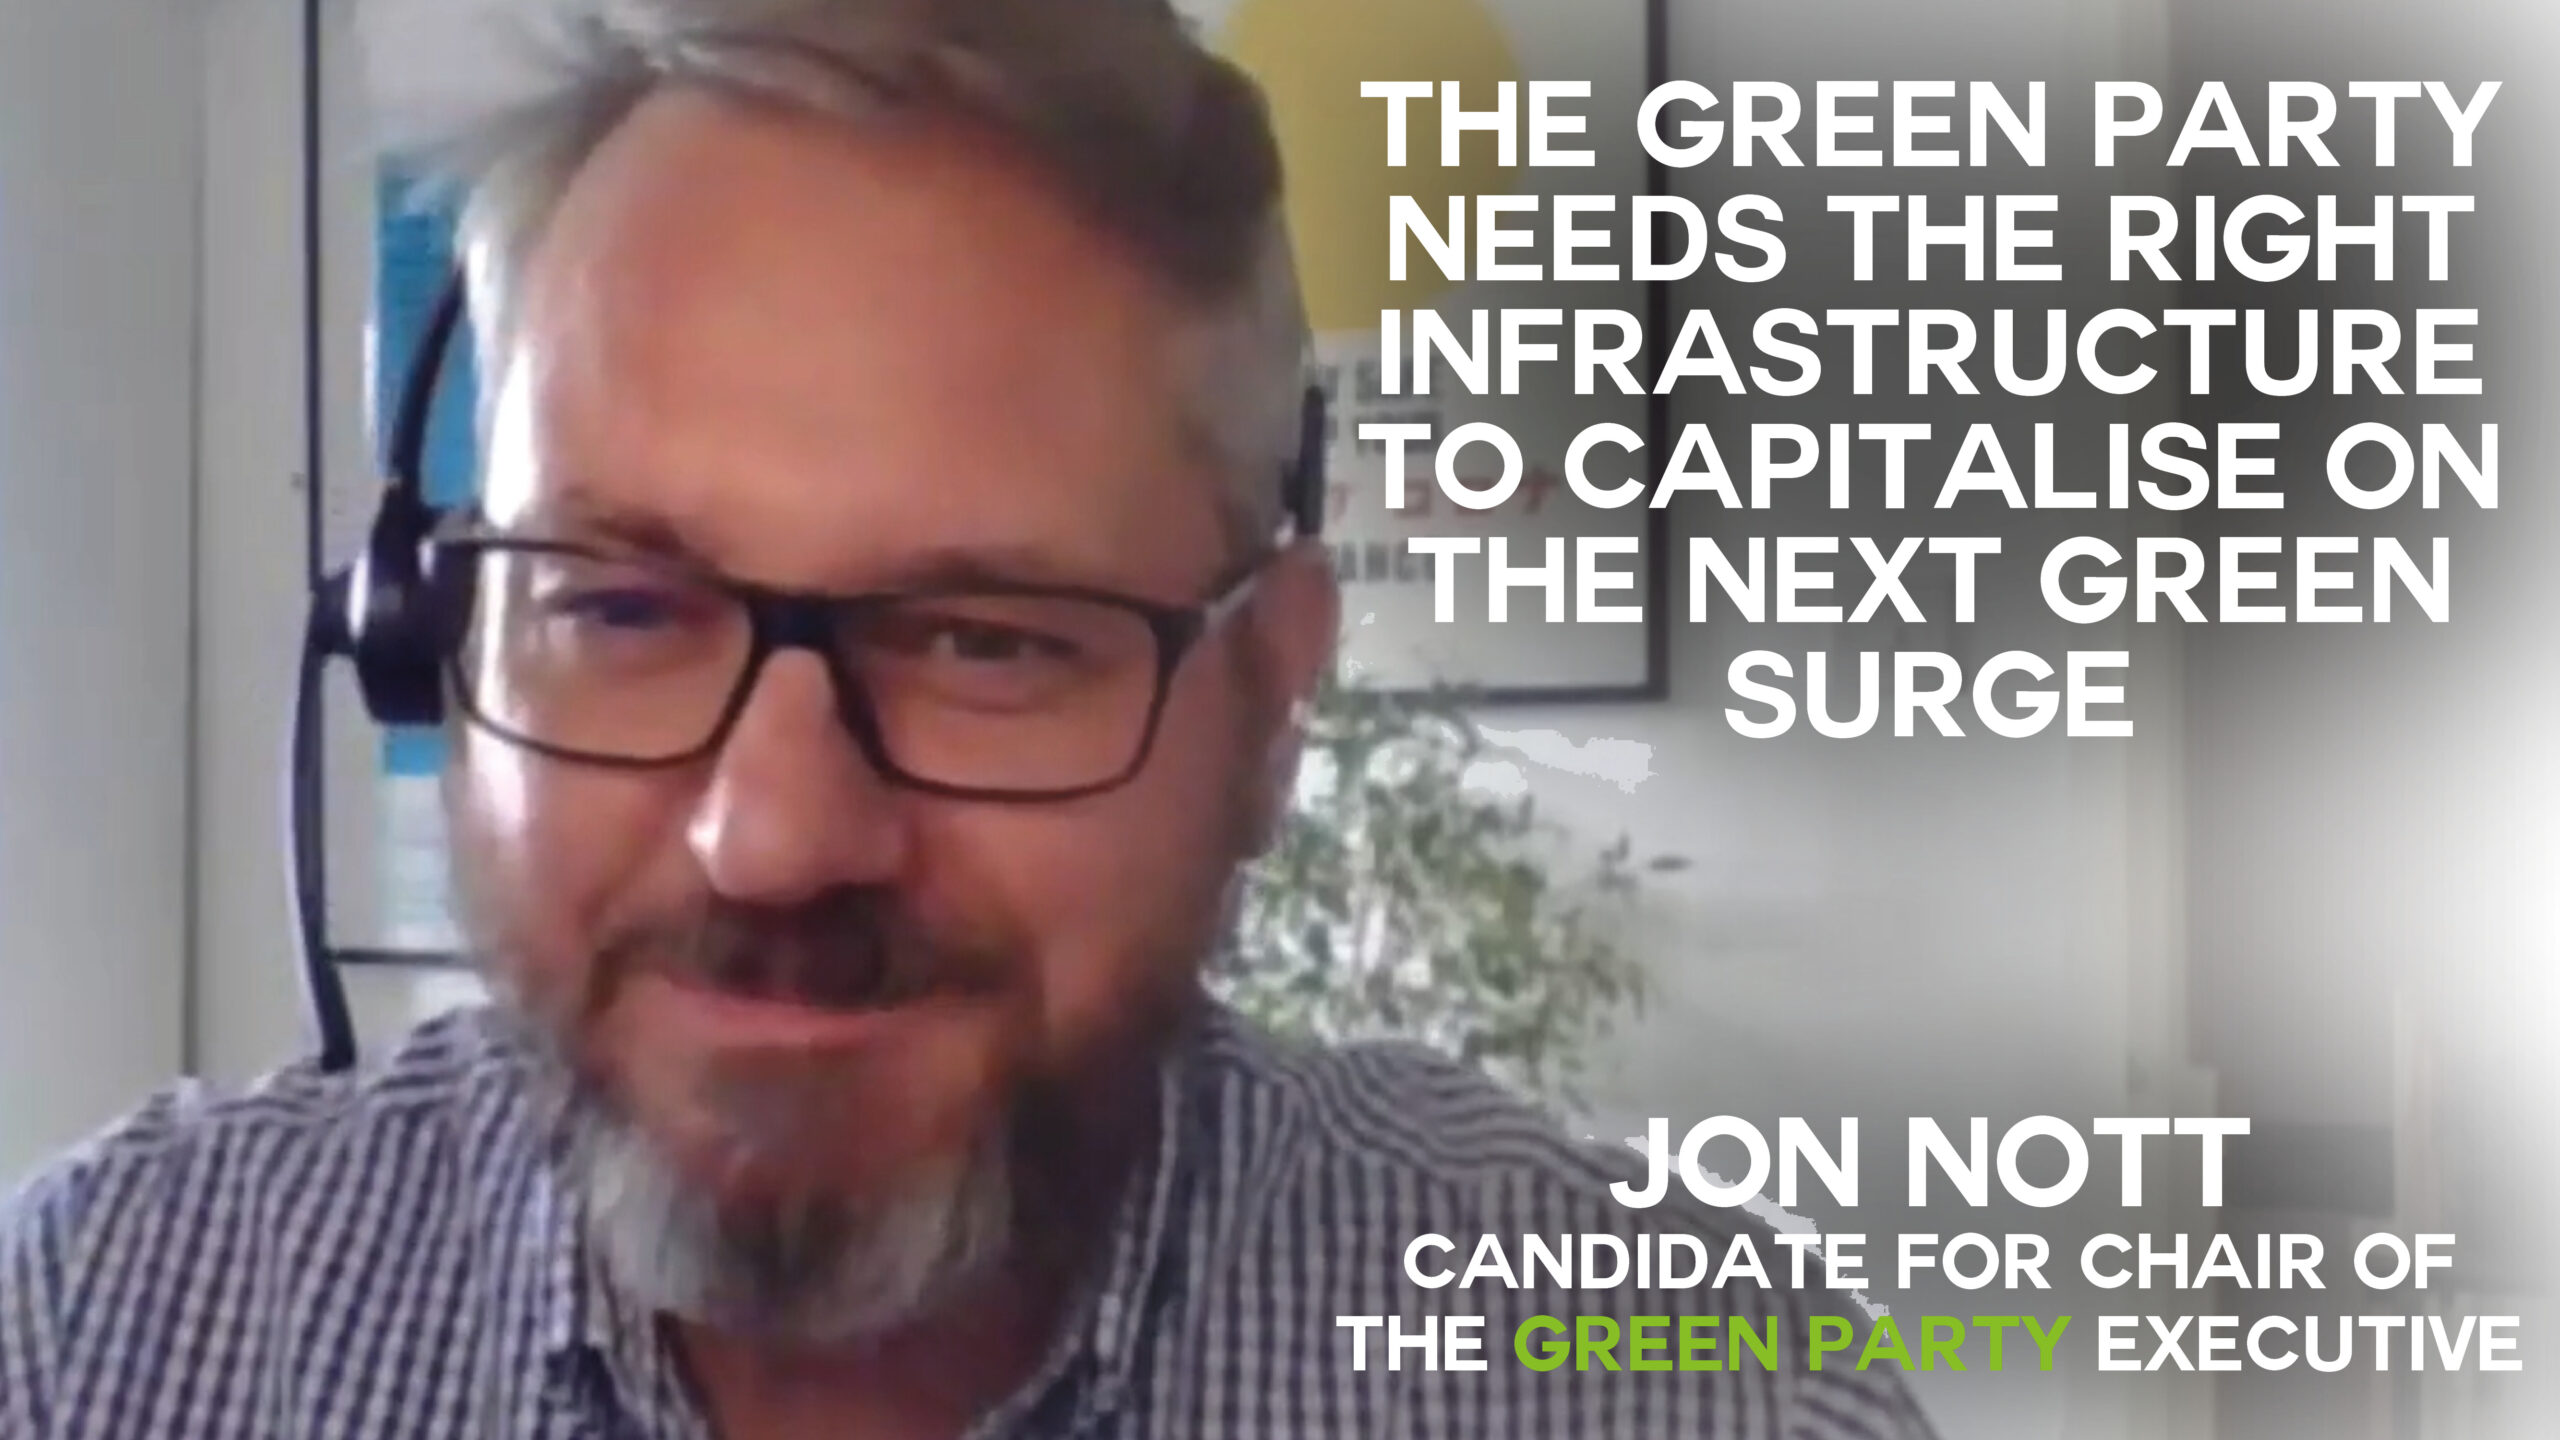 The Green Party needs the right infrastructure to capitalise on the next green surge – Interview with Jon Nott